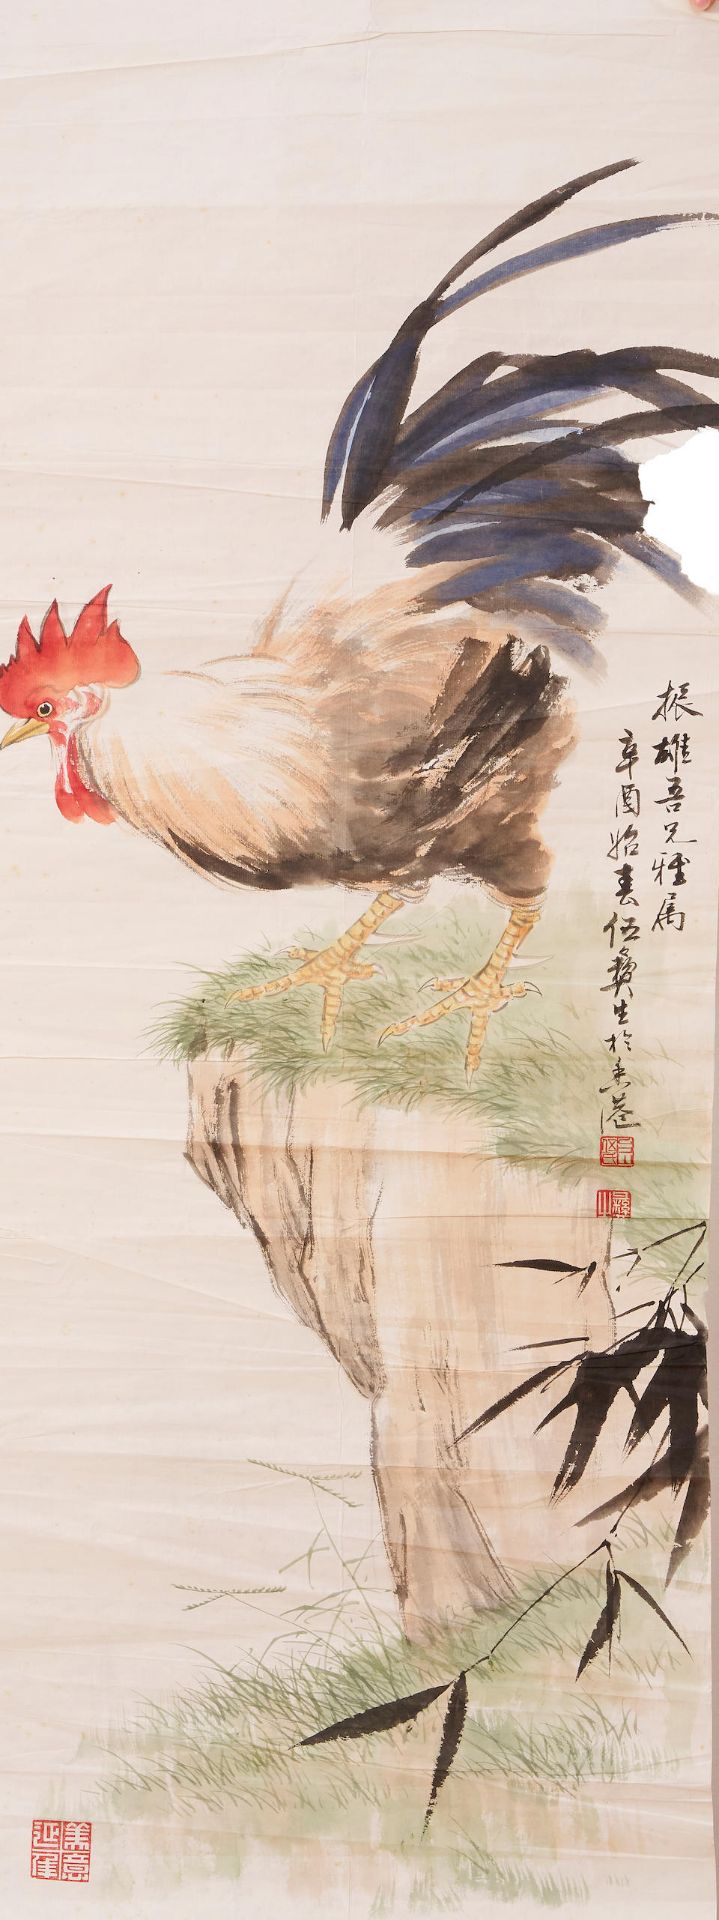 Huang Chishi (1915-1970), Lianguang, et al. Various subjects (7) - Image 3 of 8